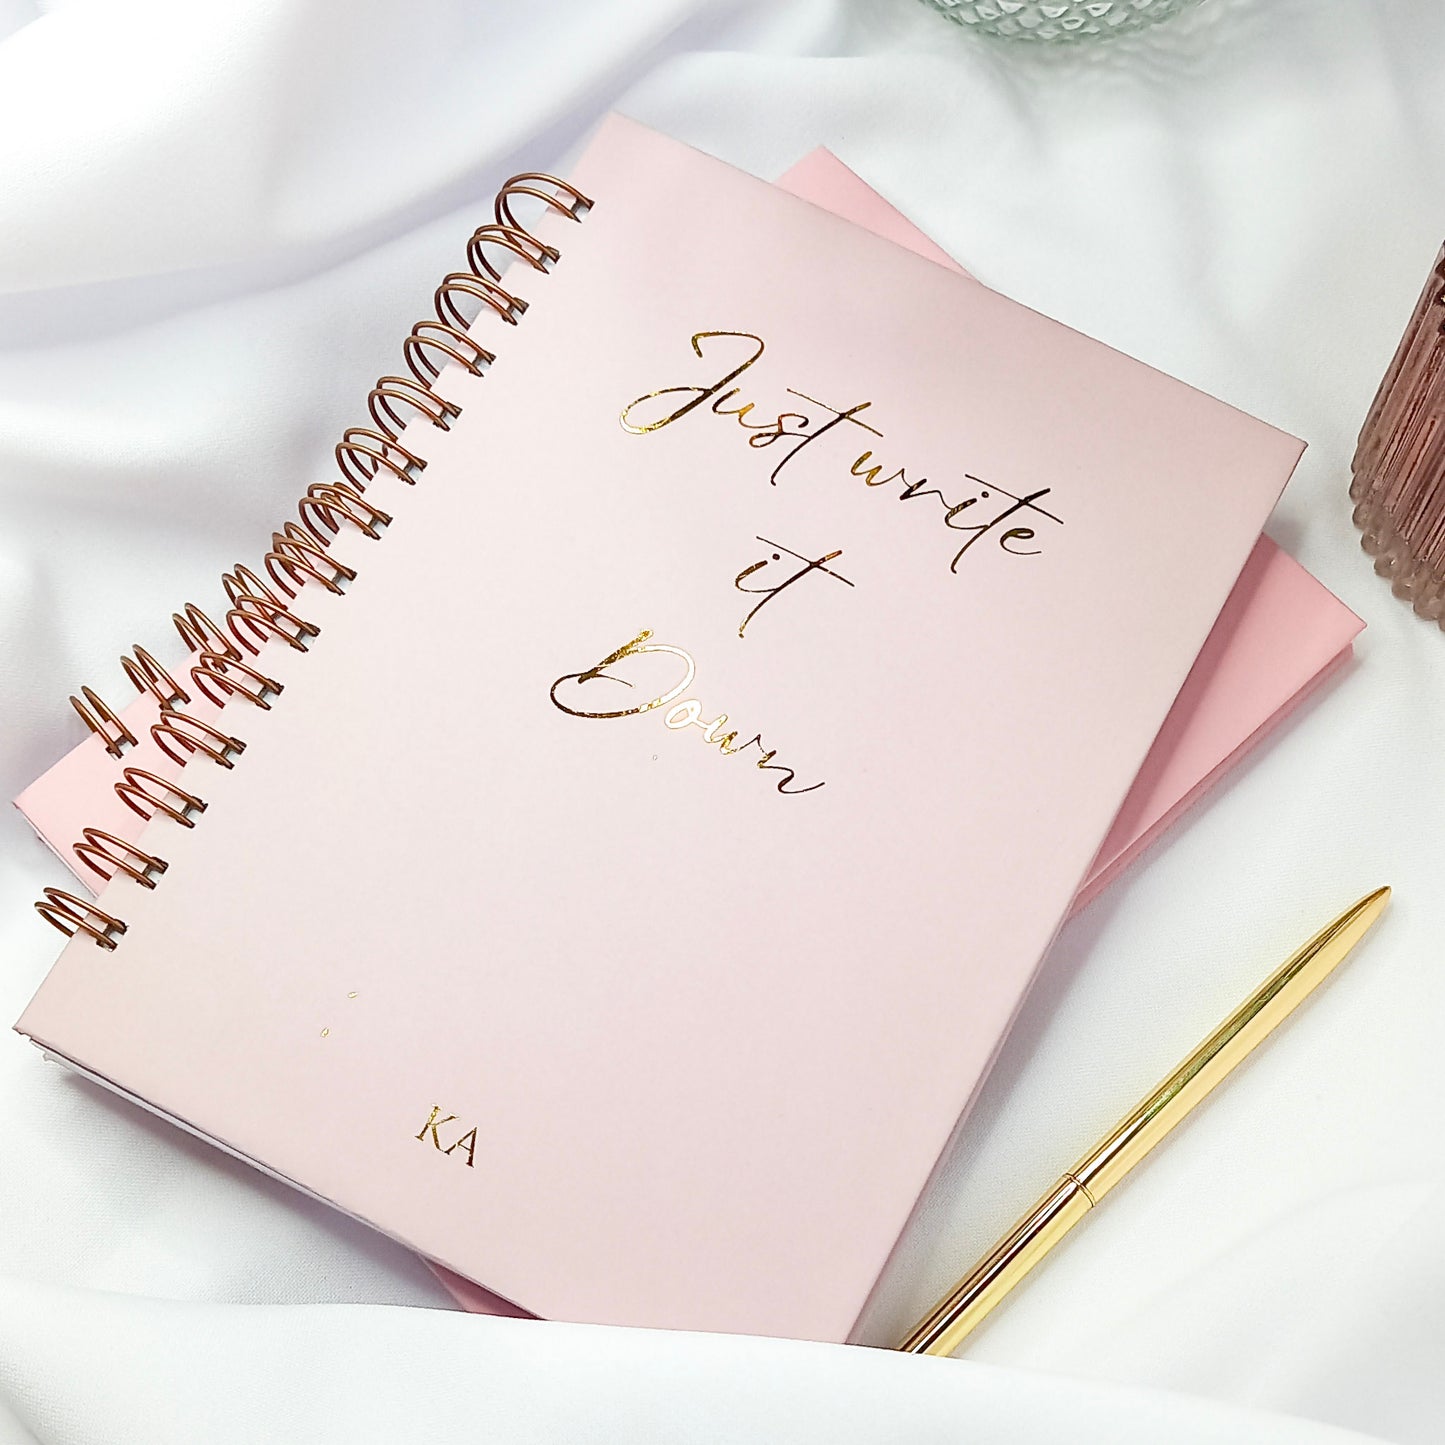 Personalised Notebook | Just write it | Valentines | Hardcover